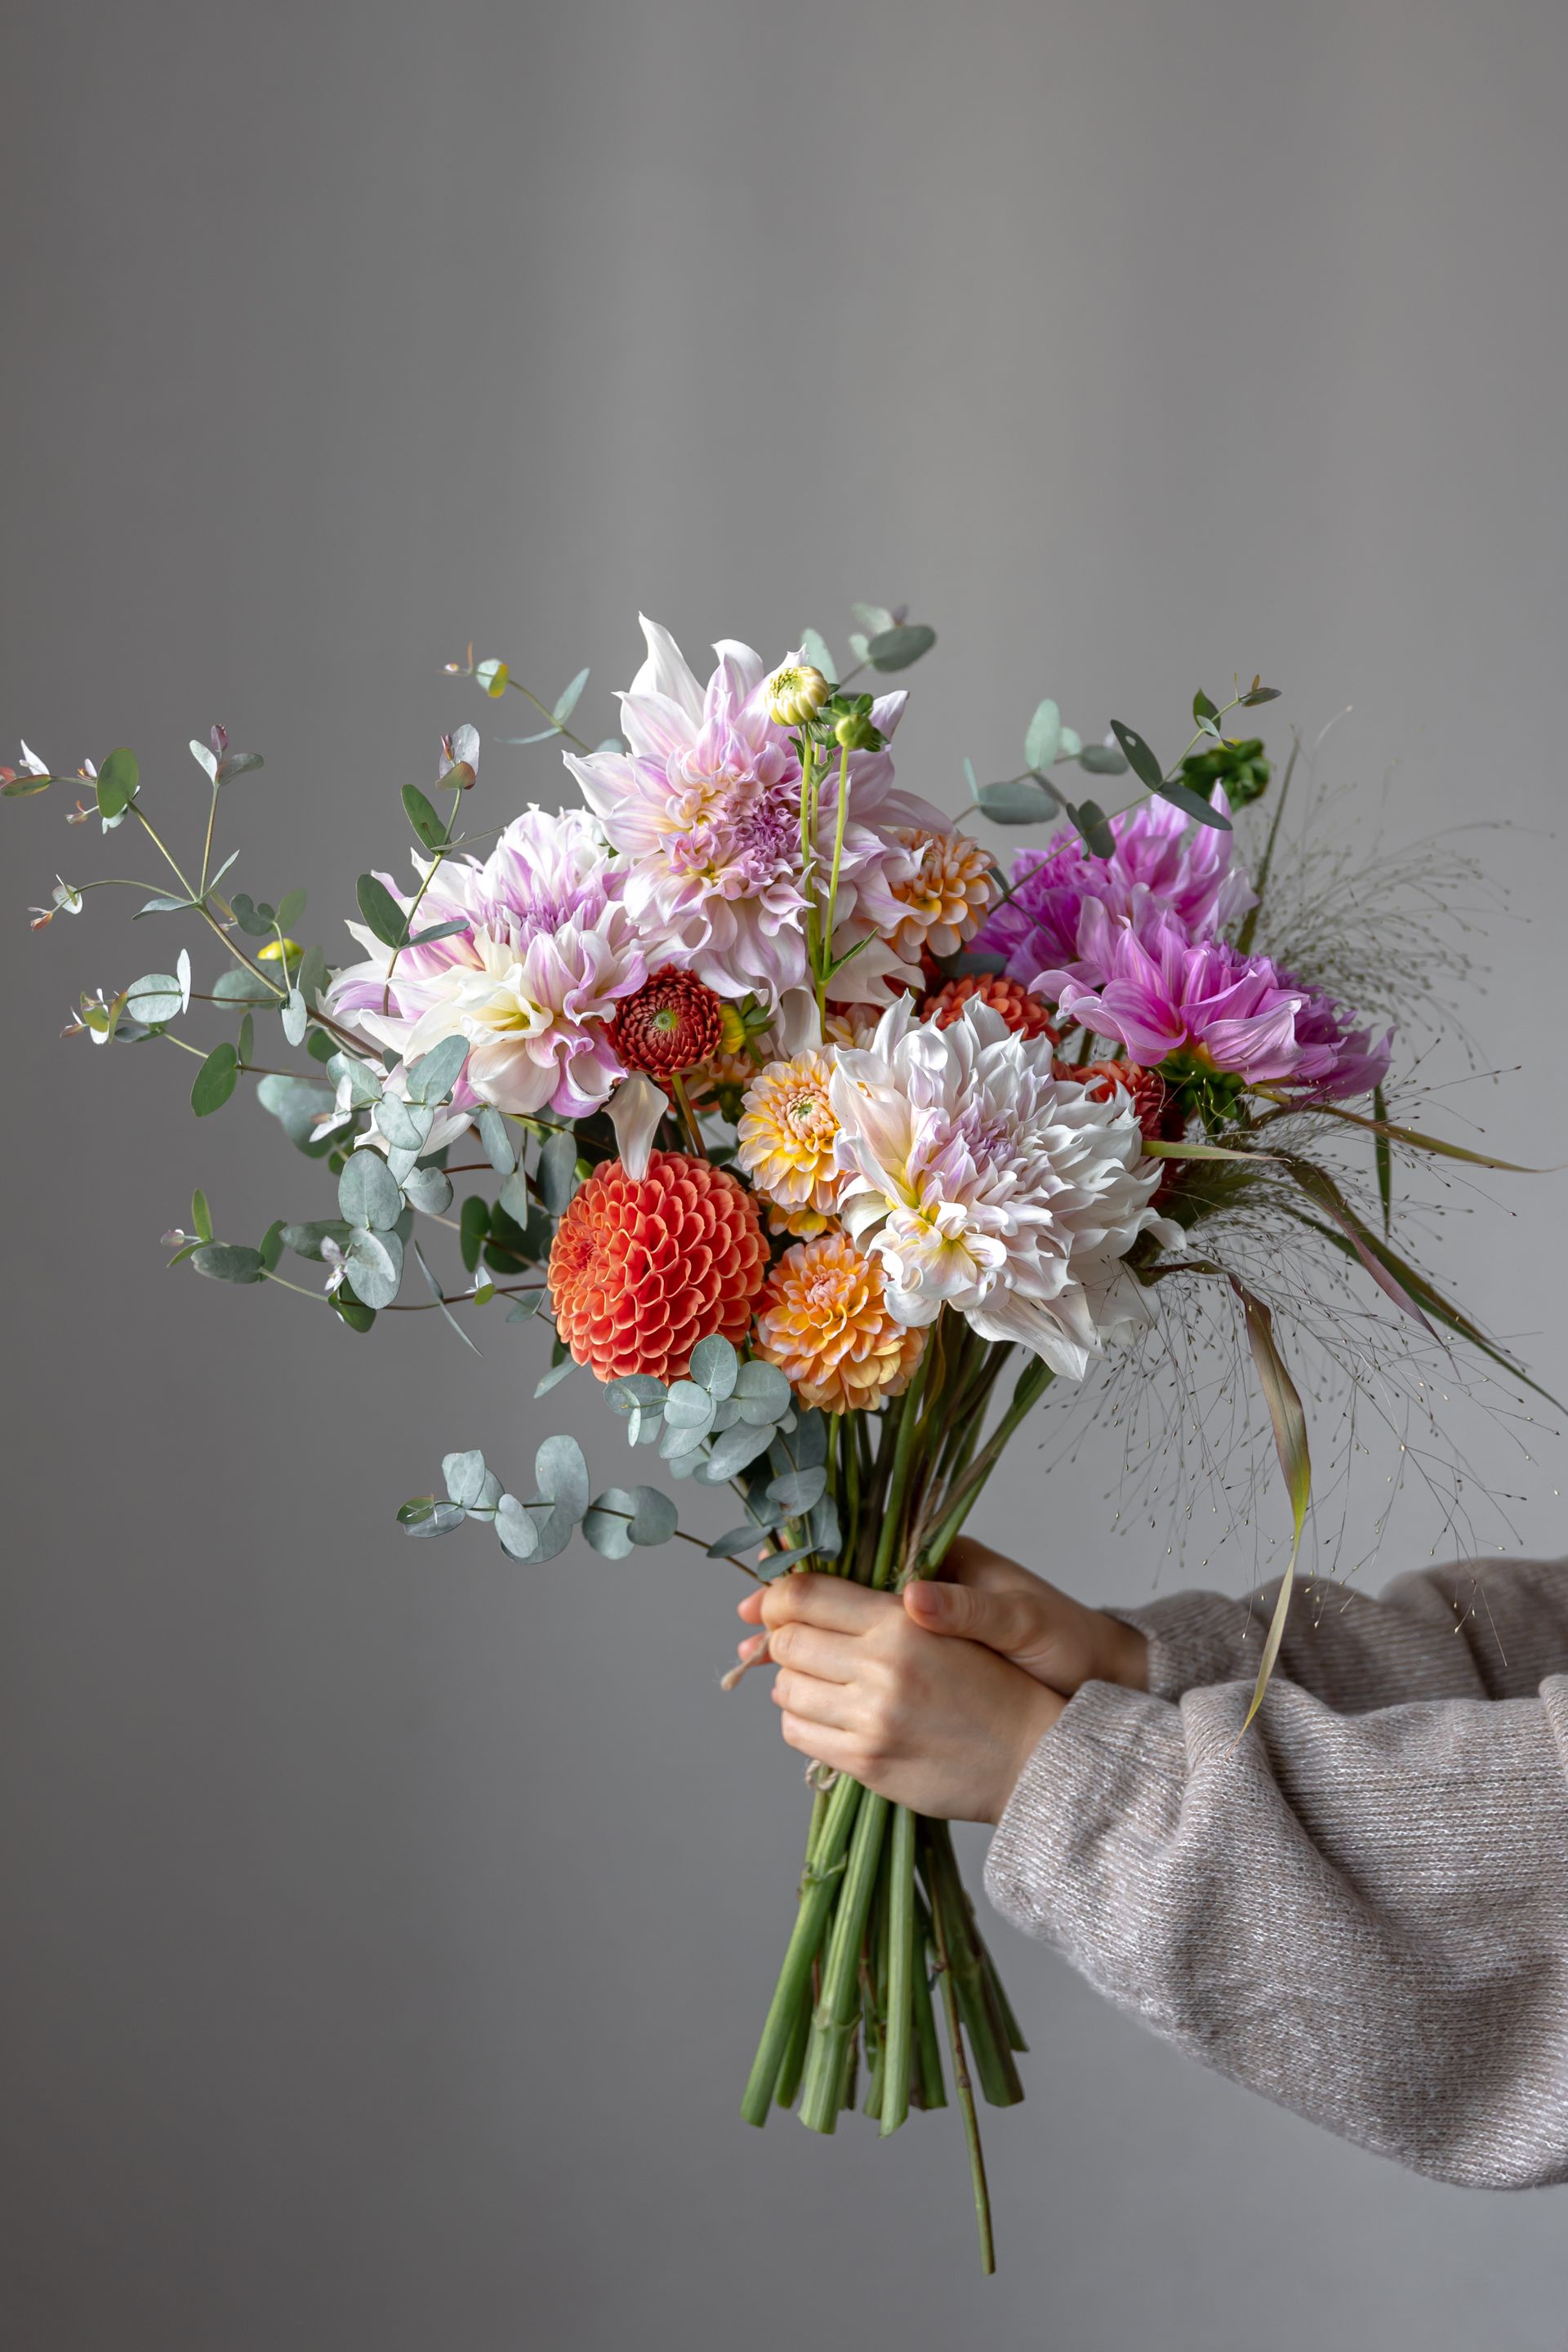 a person is holding a bouquet of flowers in their hands